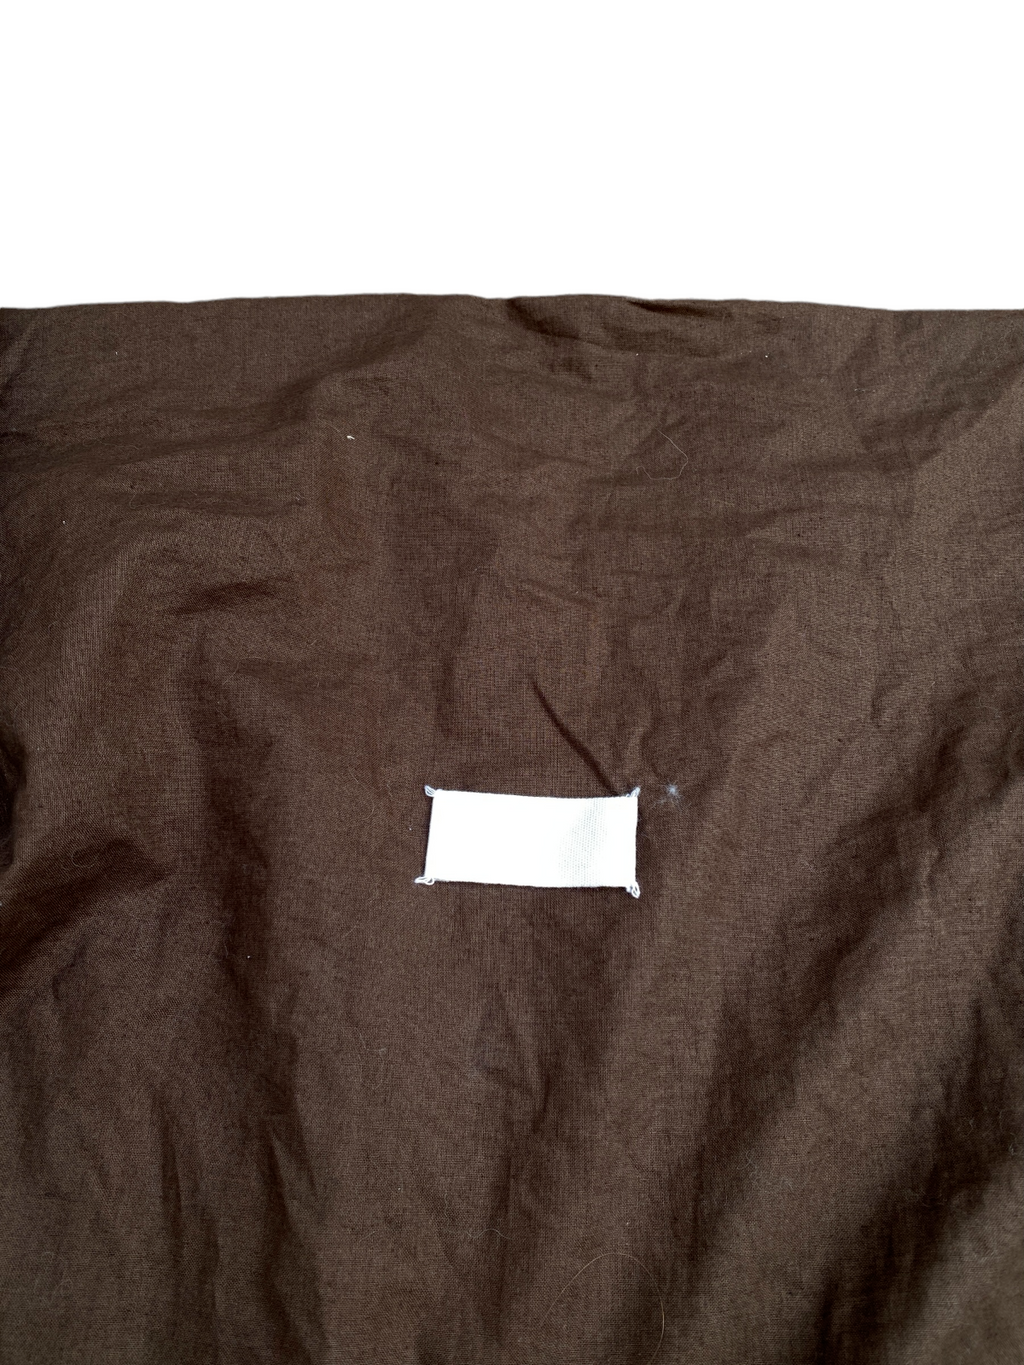 Extremely Rare FW 2000 Brown Wool Duvet Cover  Size M + Duvet